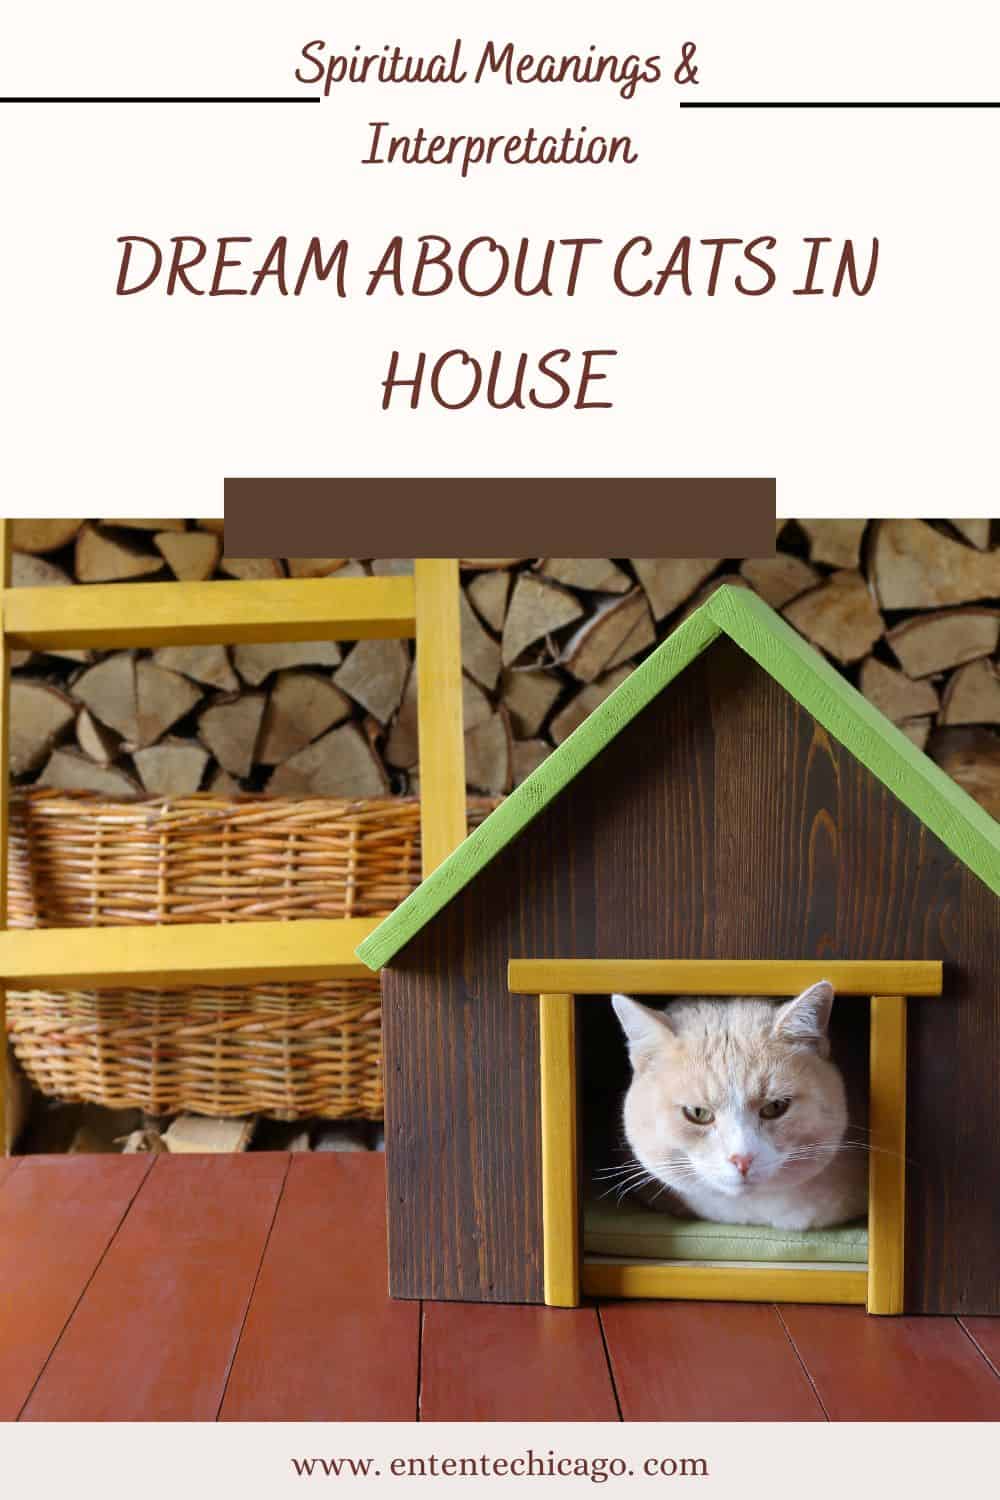 Dream About Cats In House (Spiritual Meanings & Interpretation)